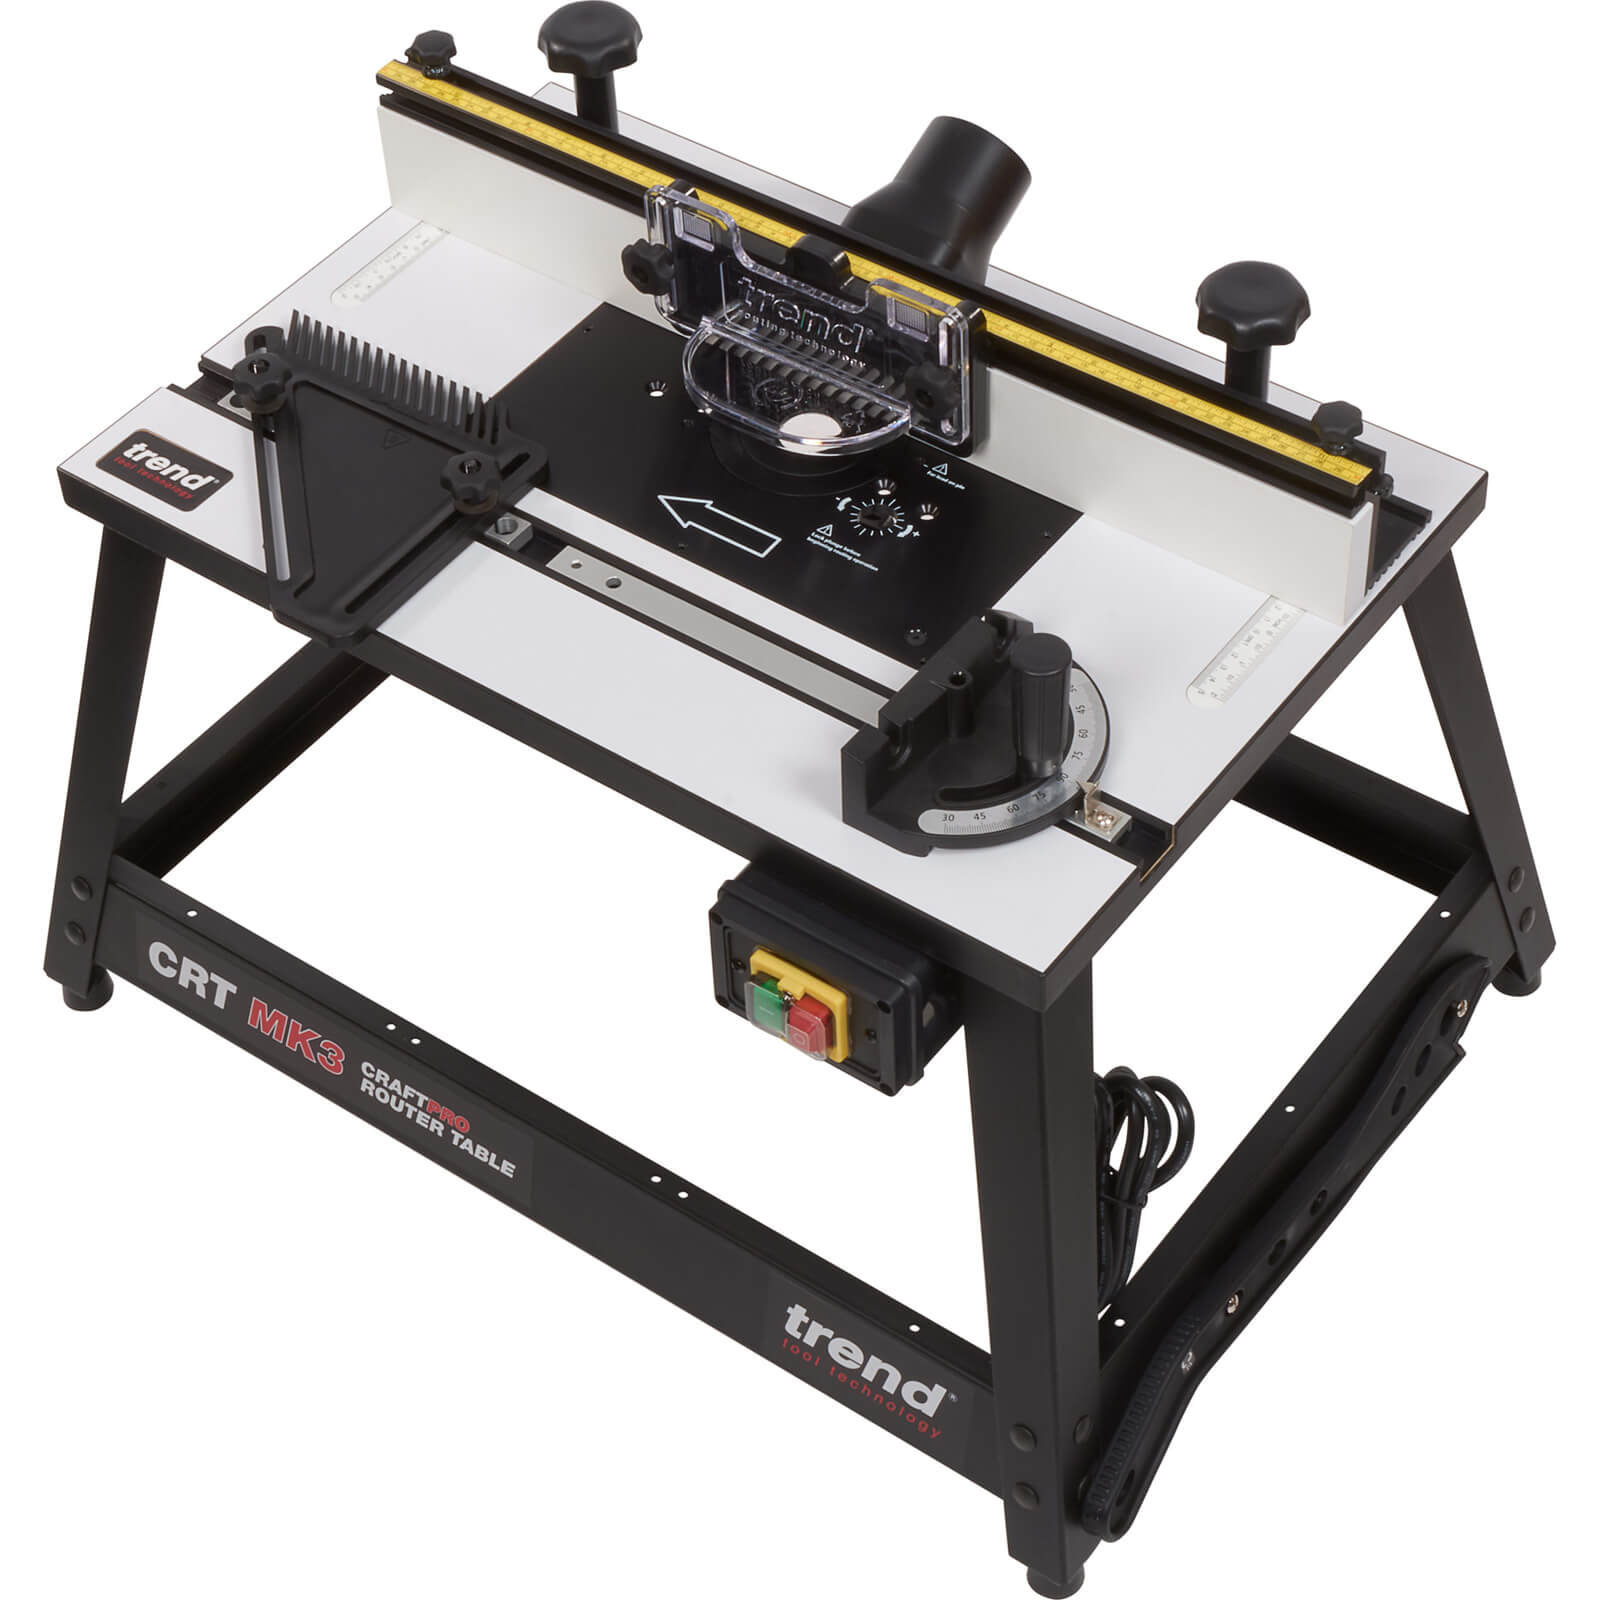 Image of Trend CRAFTPRO Mk3 Router Table 110v